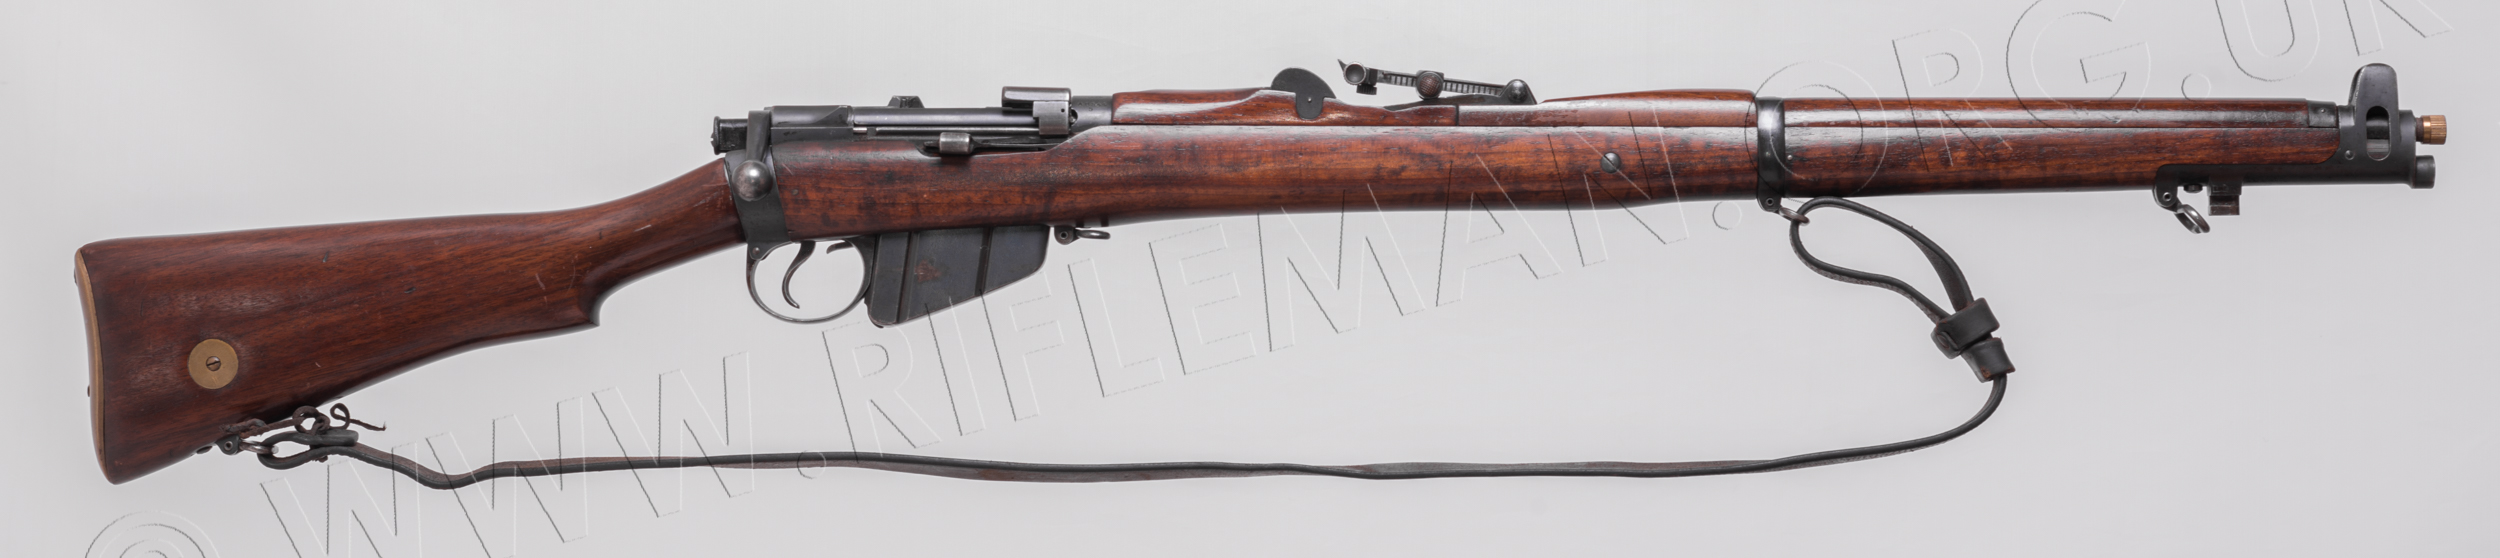 Exploded View: Short, Magazine Lee-Enfield, Mk III